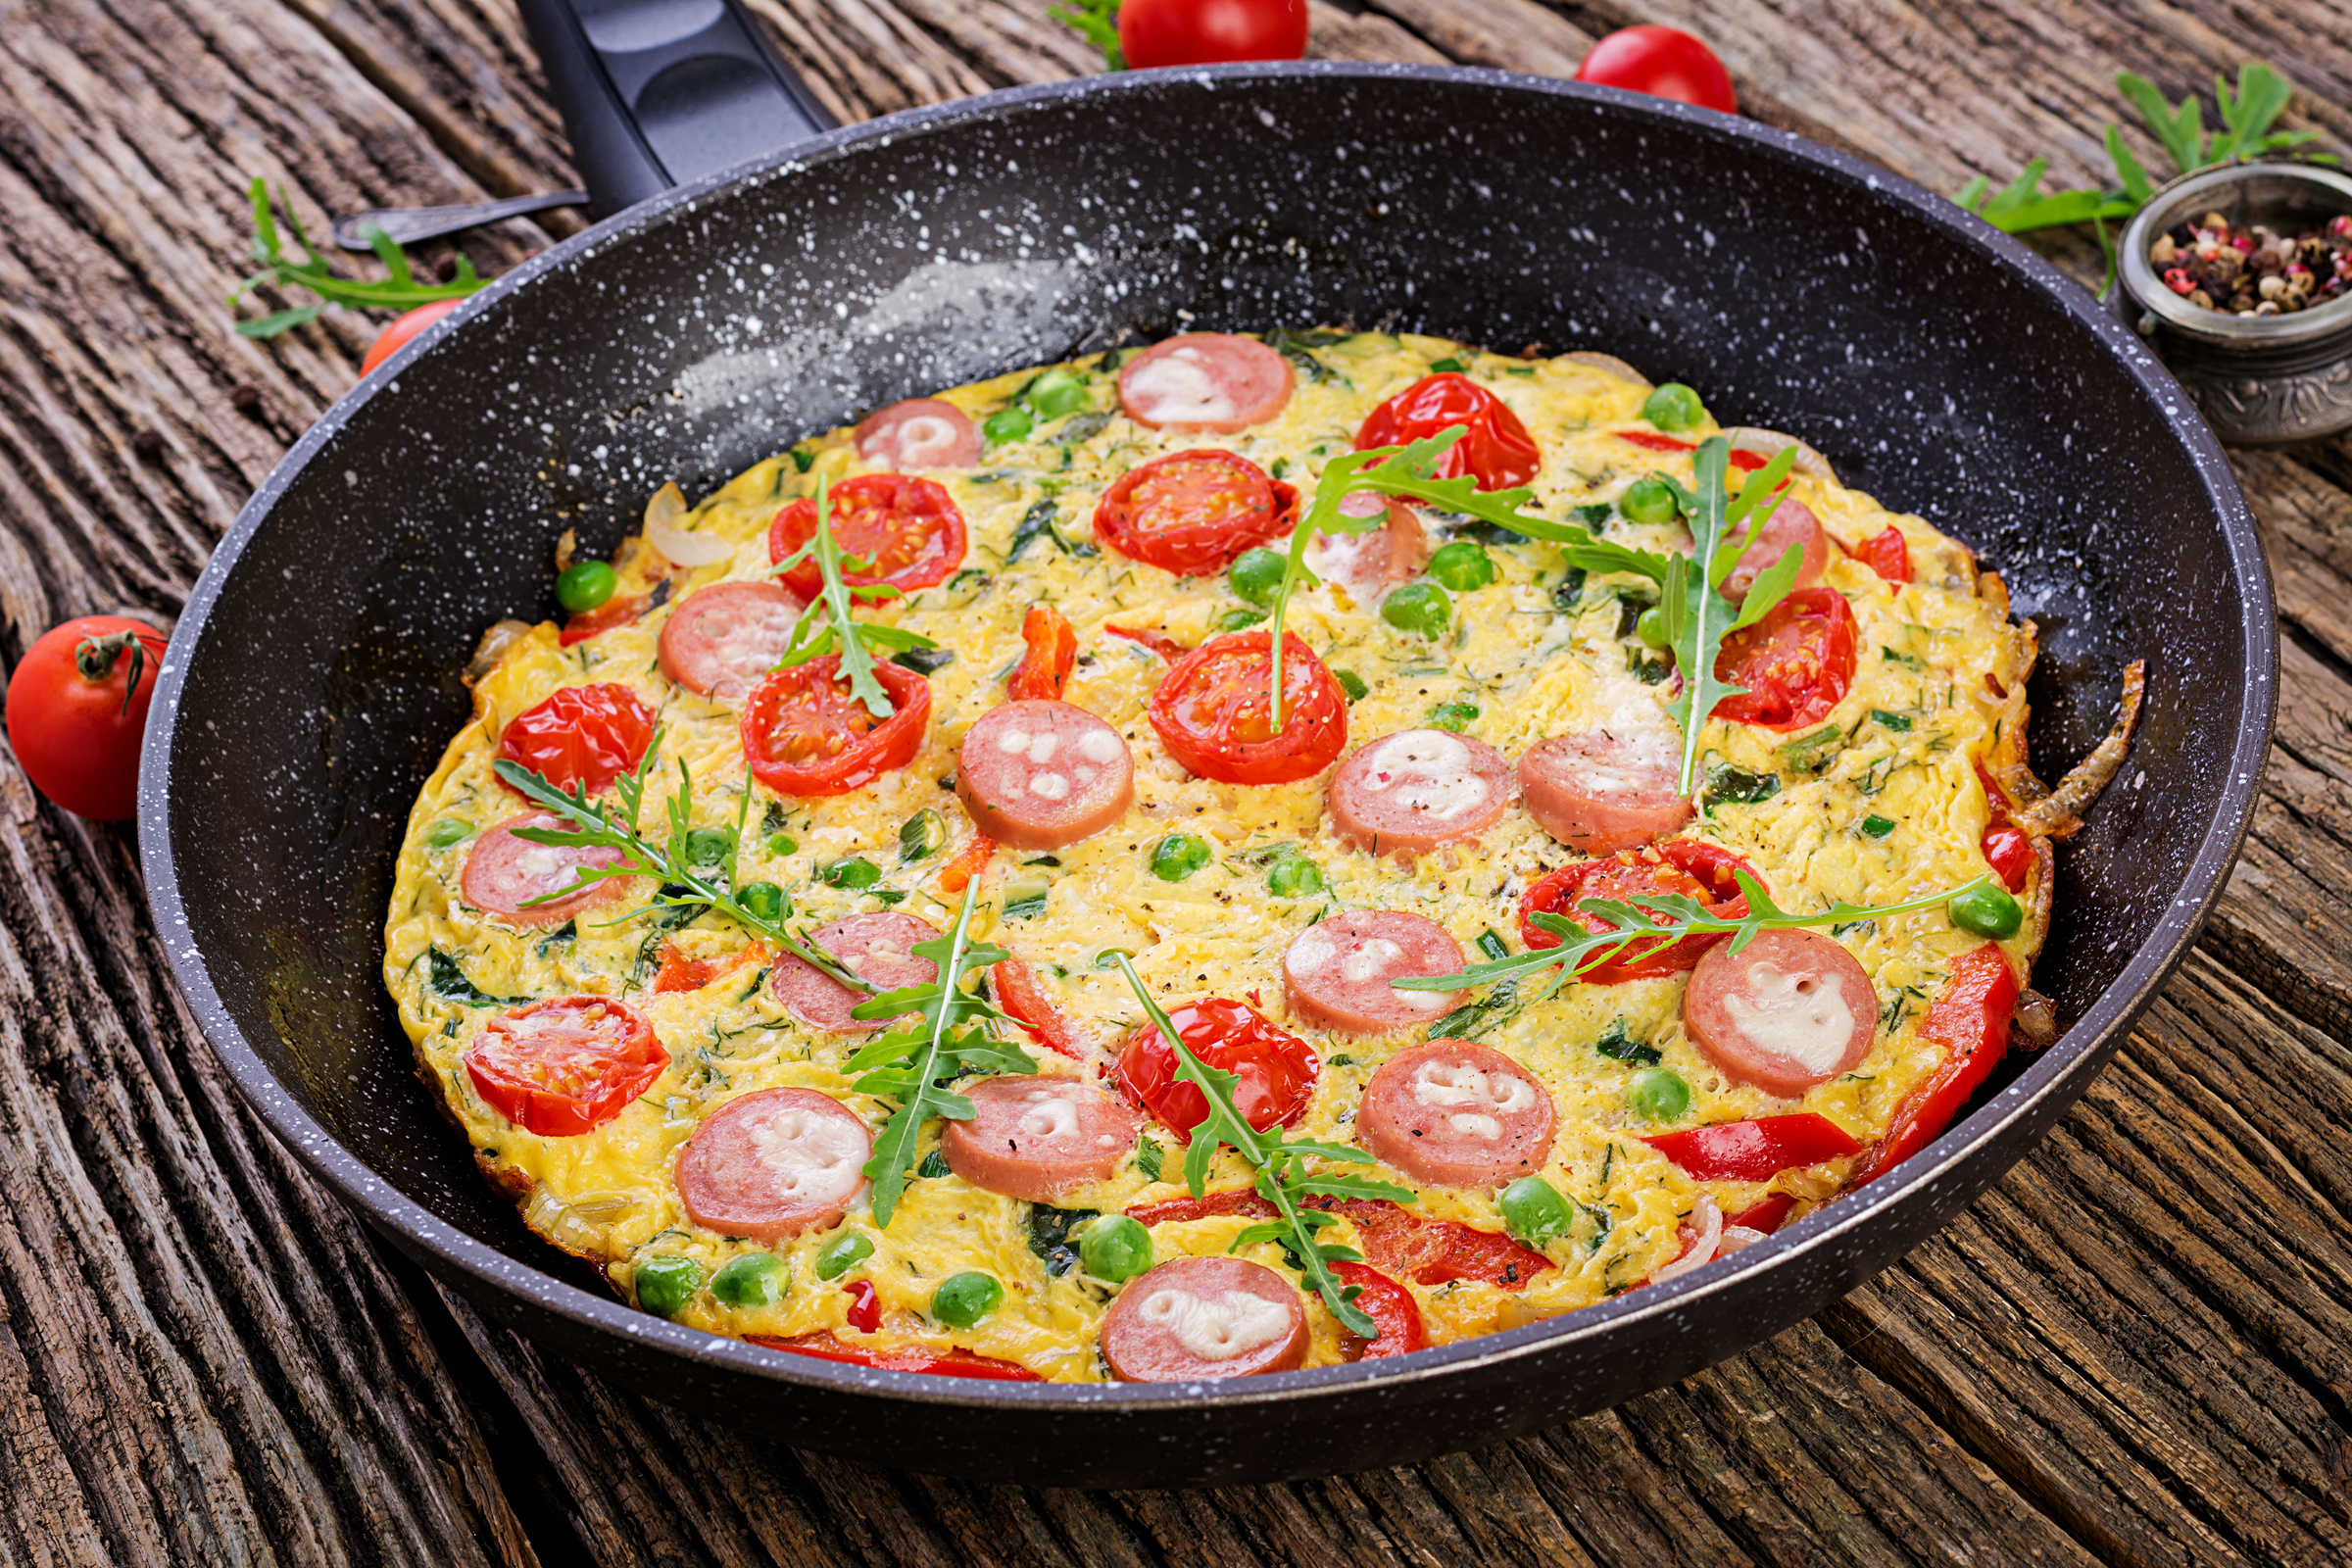 Omelette with tomatoes, sausage and green peas  in rustic style.  Frittata - italian omelet.